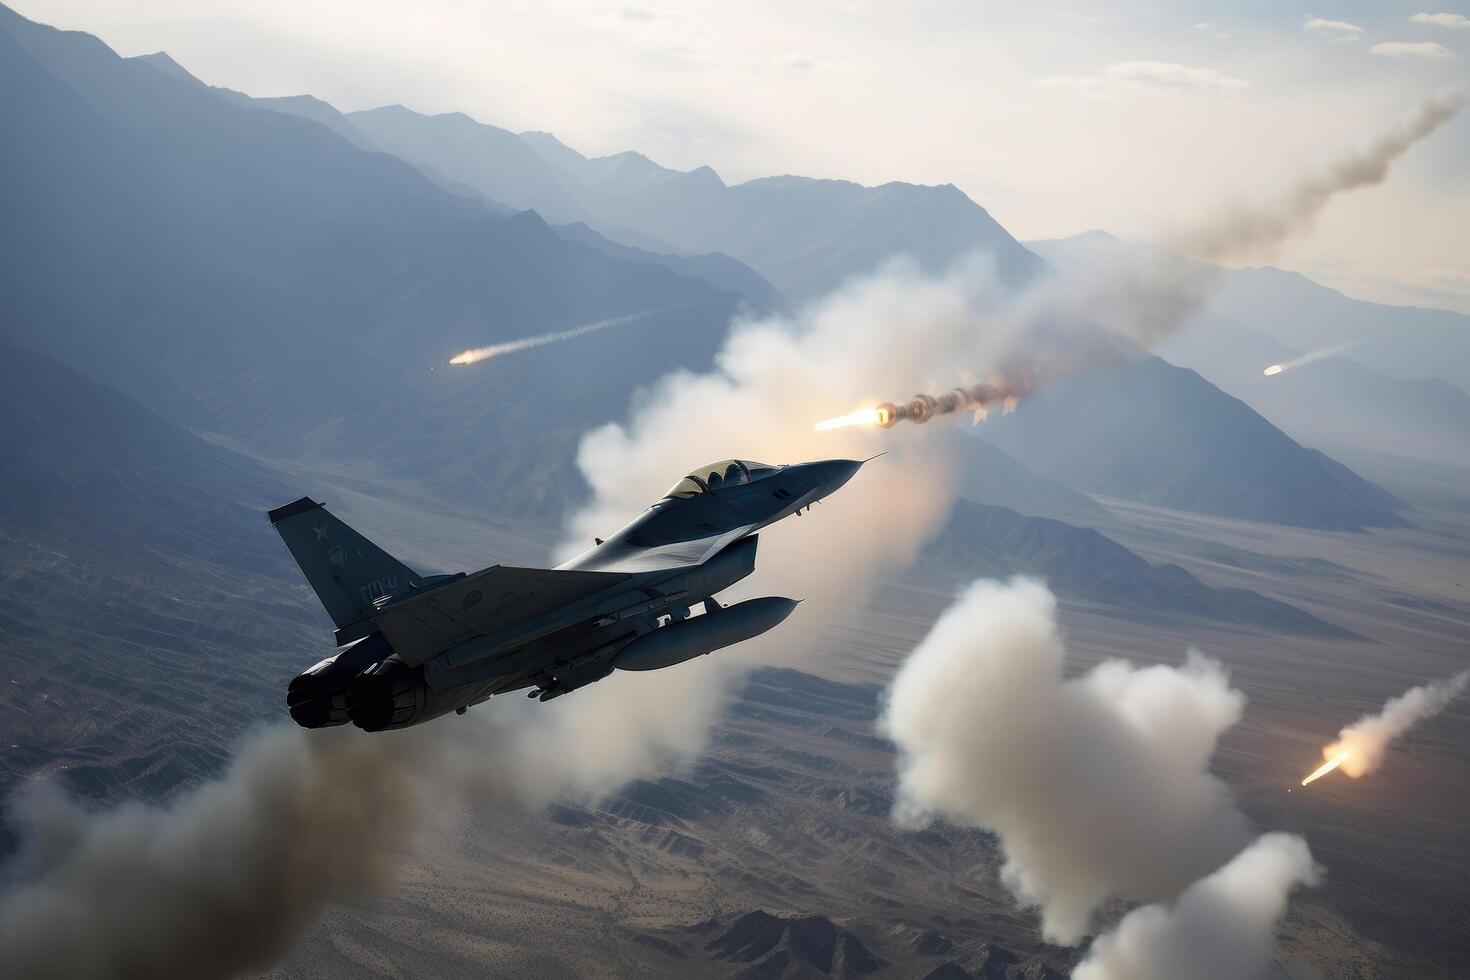 fighter jet flying in the sky over the mountains. Fighter jet shooting on another fighter jet, photo